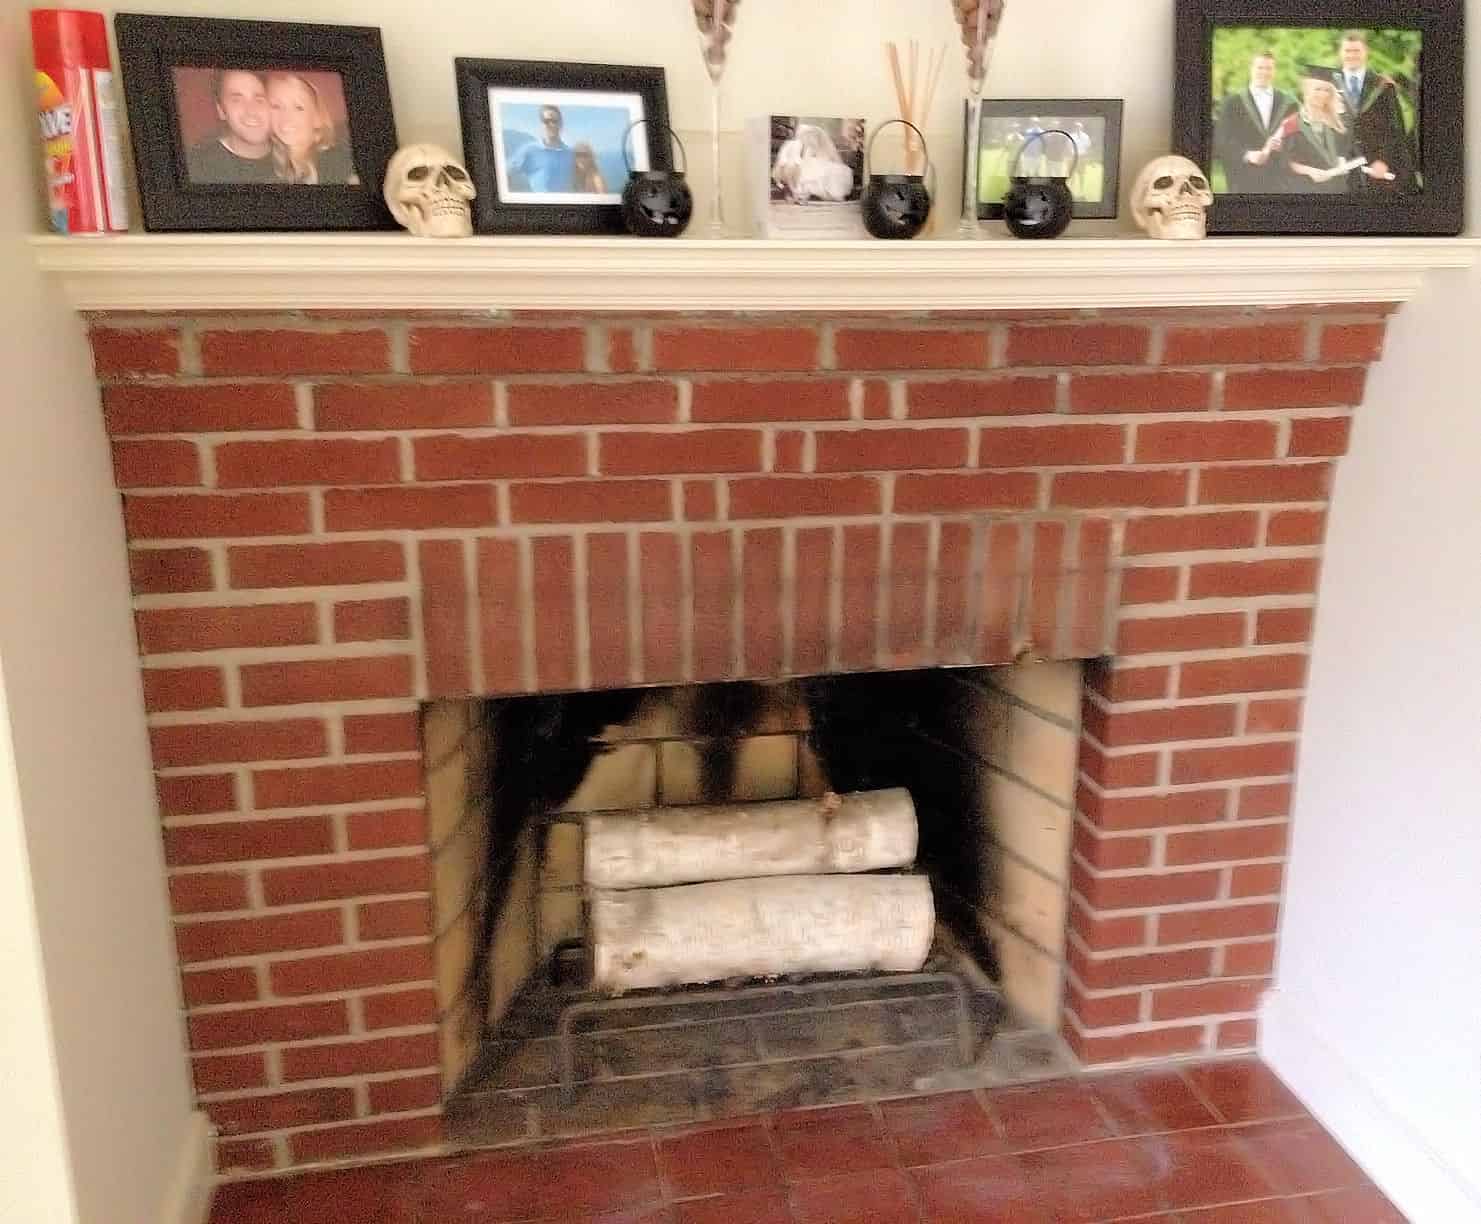 A brick fireplace and wooden mantel with photo frames and various Halloween decor